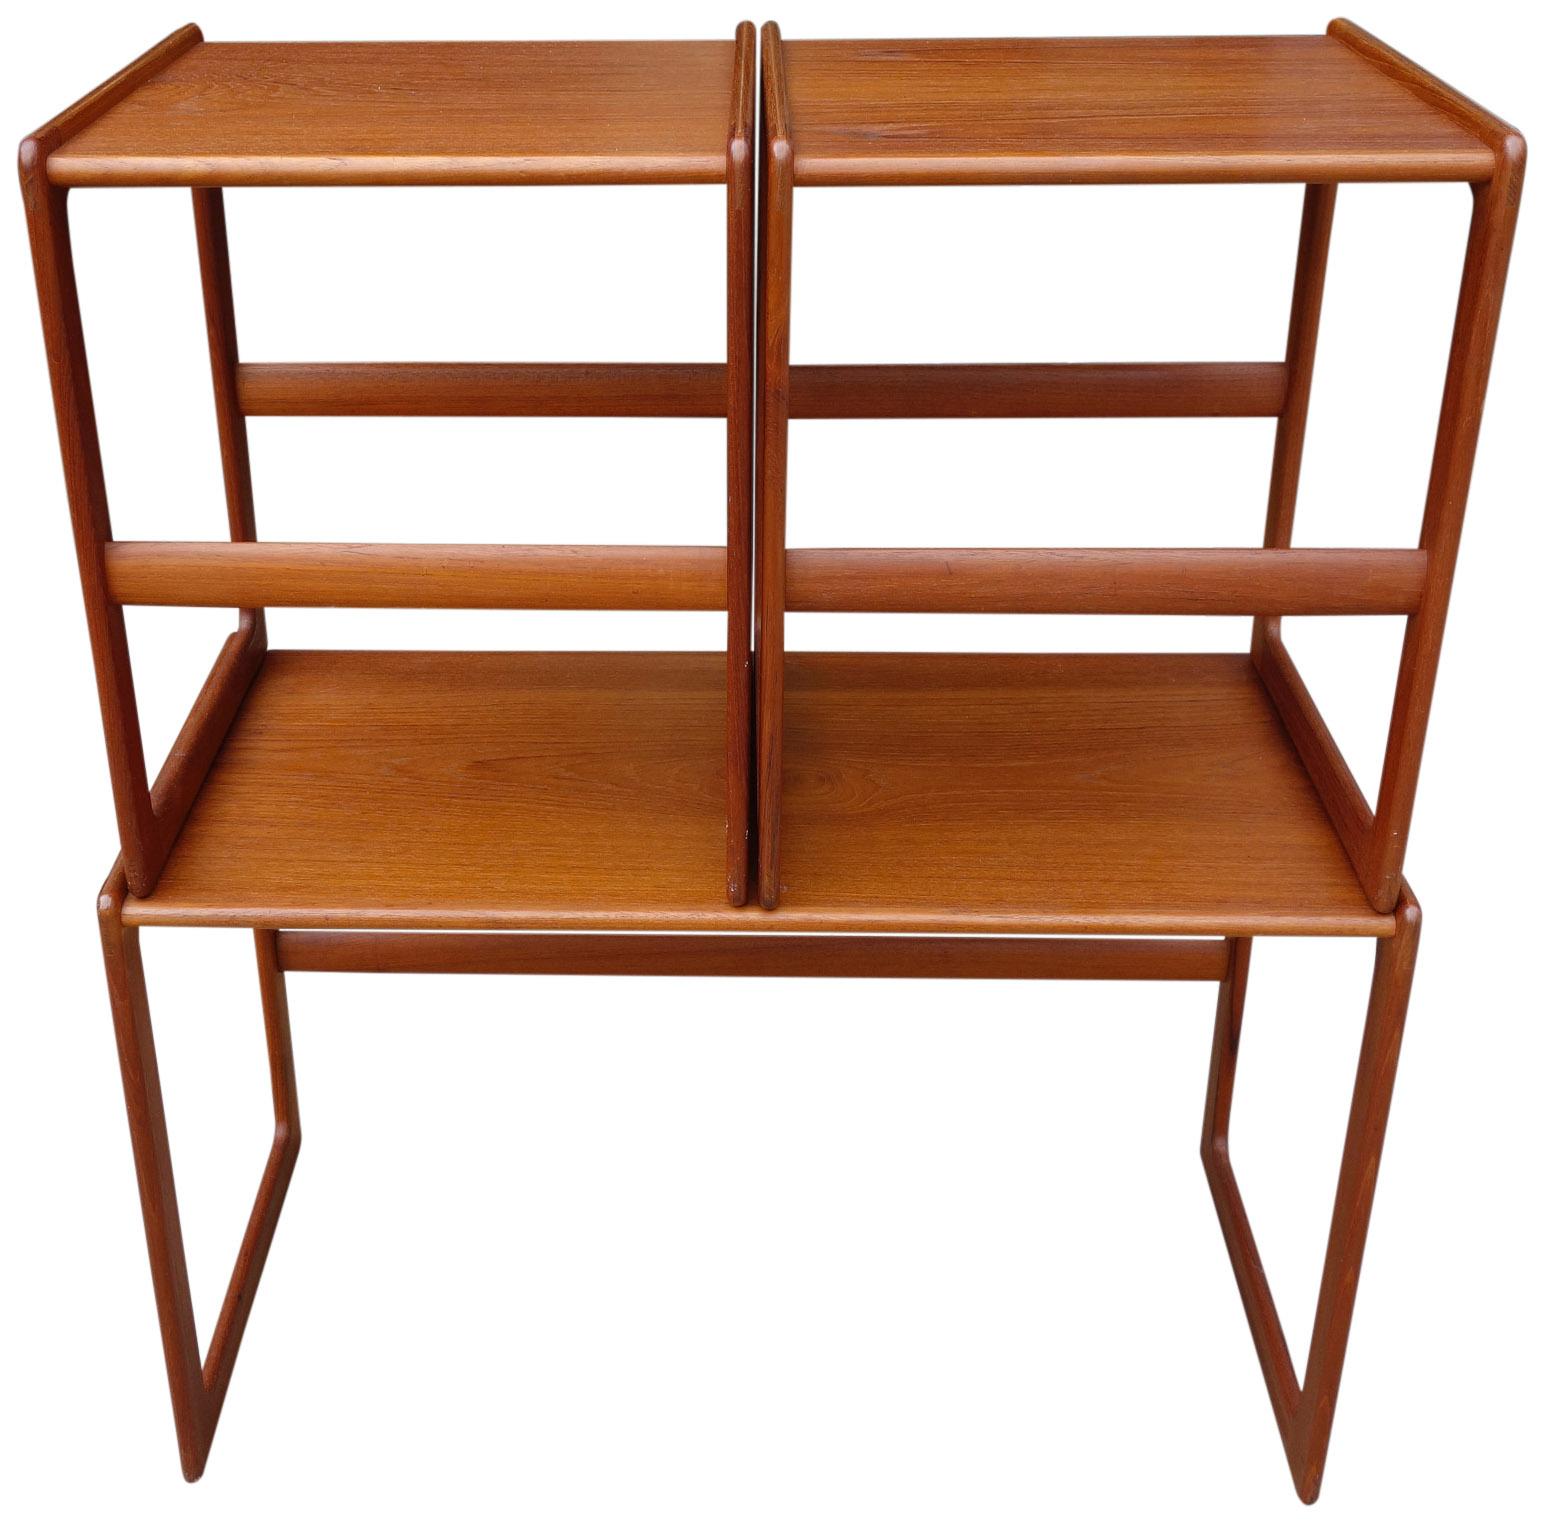 For you consideration is this wonderful set of nesting tables in teak wood. Minimal to the eye with complex joinery, these multifunctional tables are a perfect addition to your midcentury home. 

In near perfect vintage condition seeing very